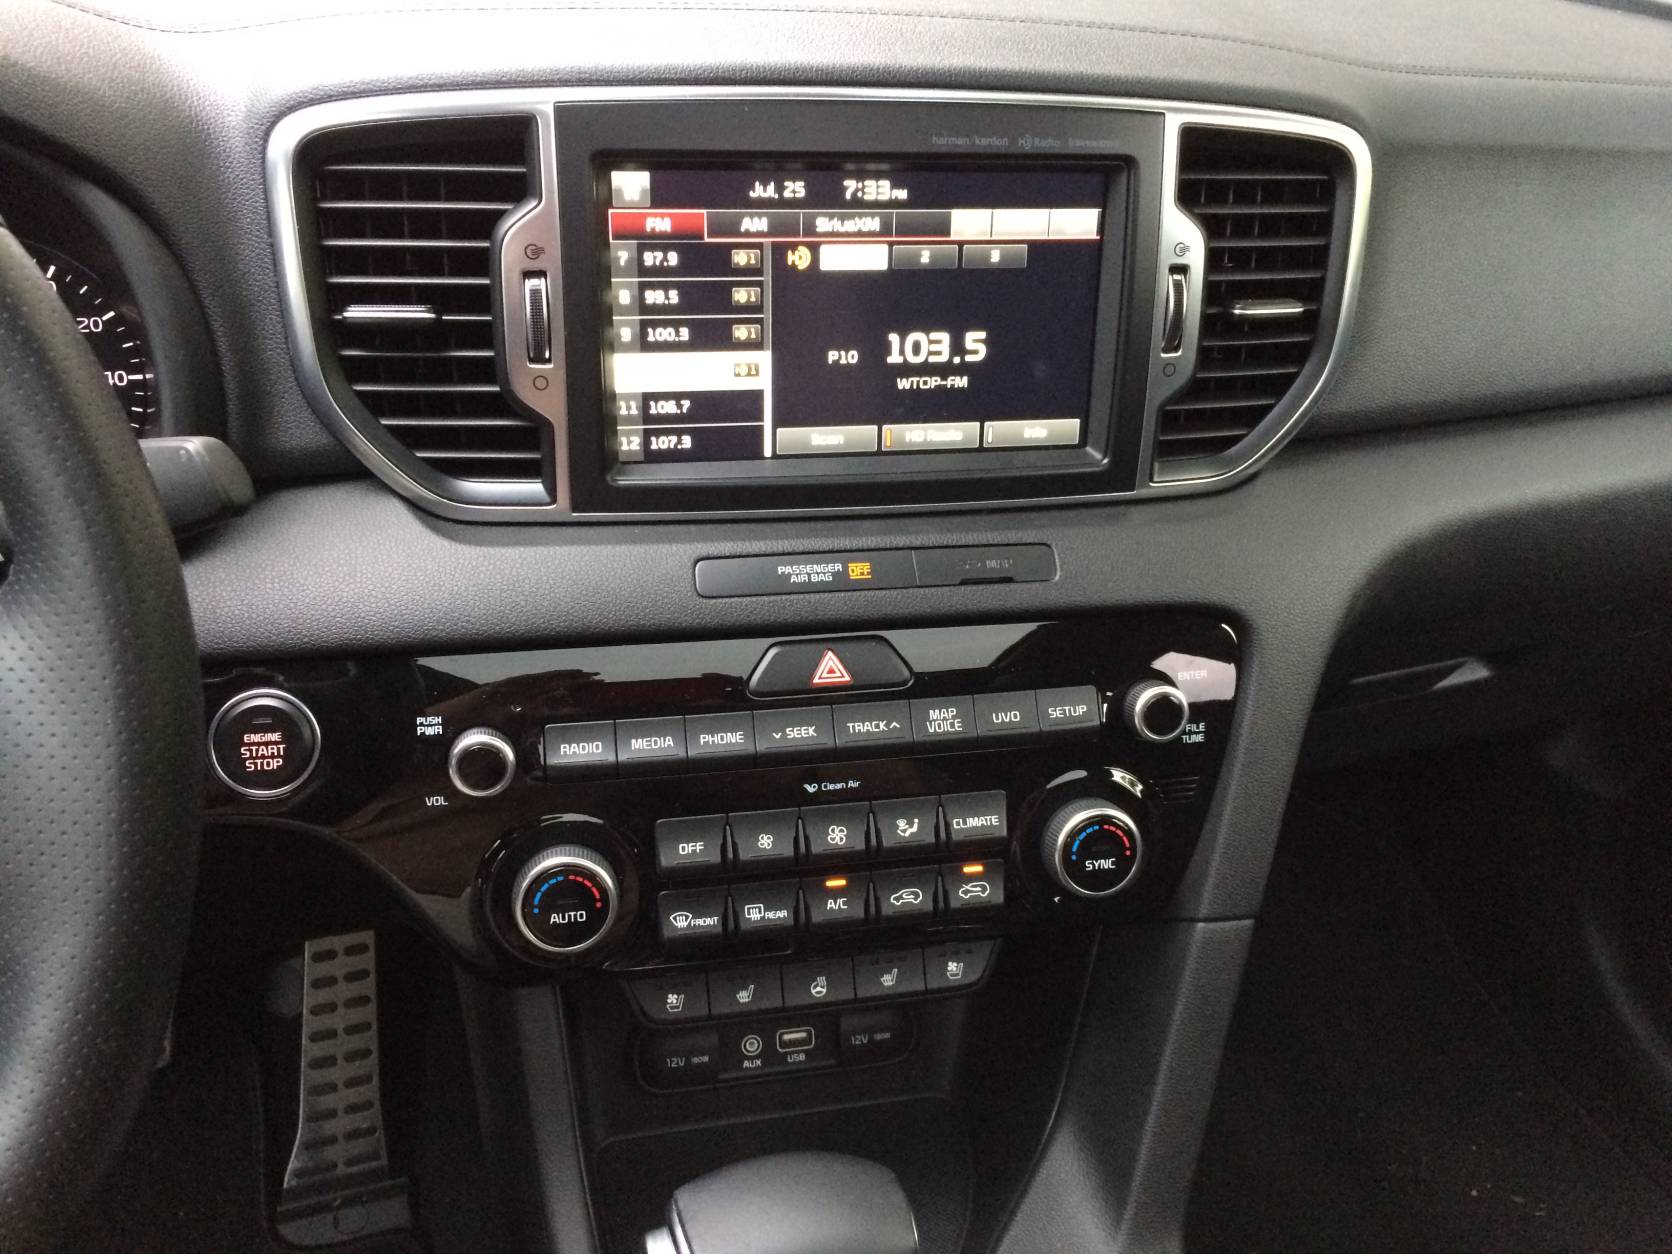 There are a lot of buttons on the center console, and it takes time to get used to them all and what they do. Luckily, the 8-inch touch screen is easy to use. (WTOP/Mike Parris)